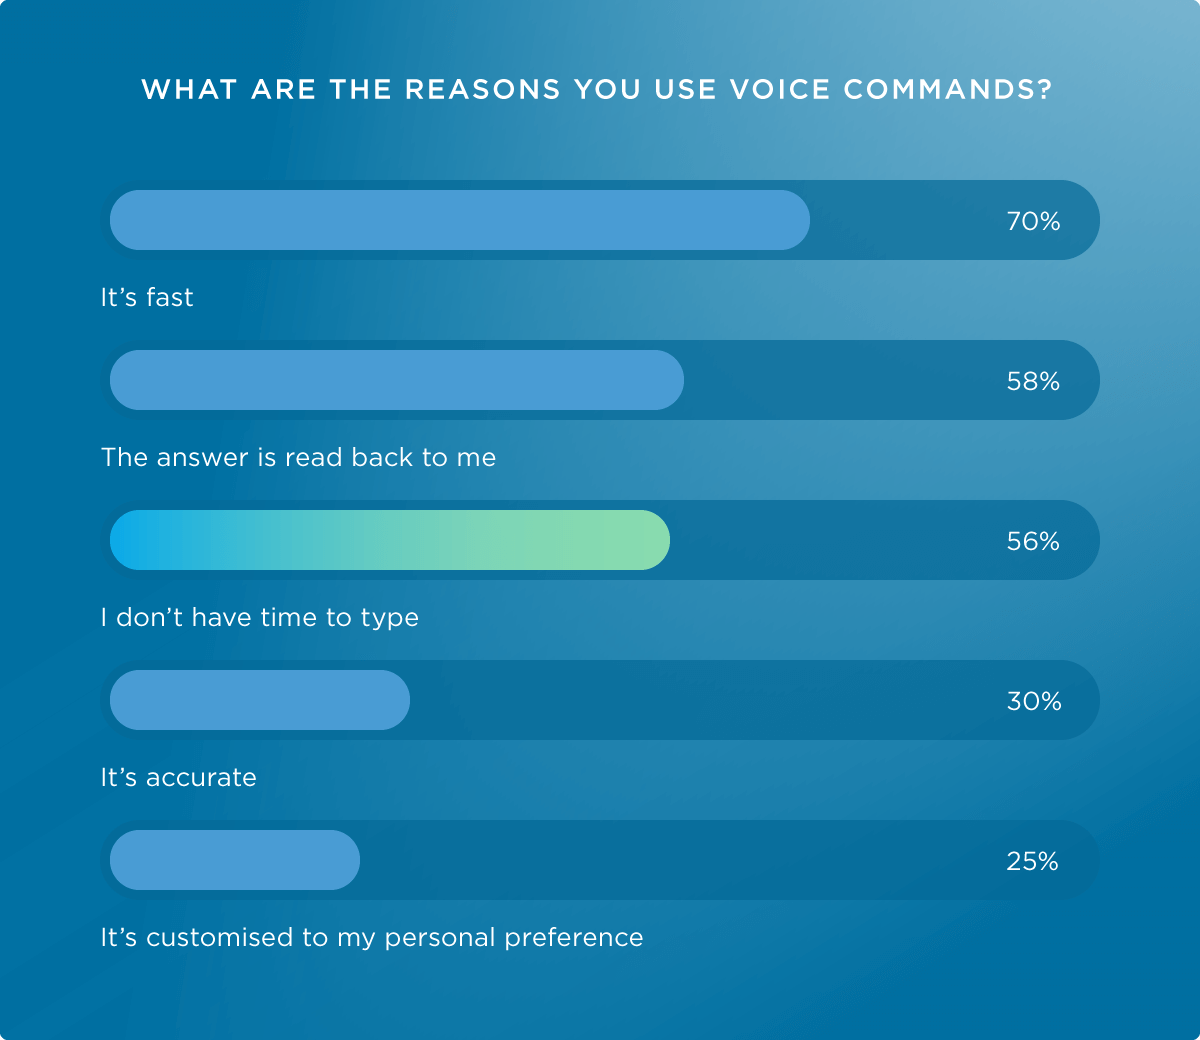 Reasons for using voice commands